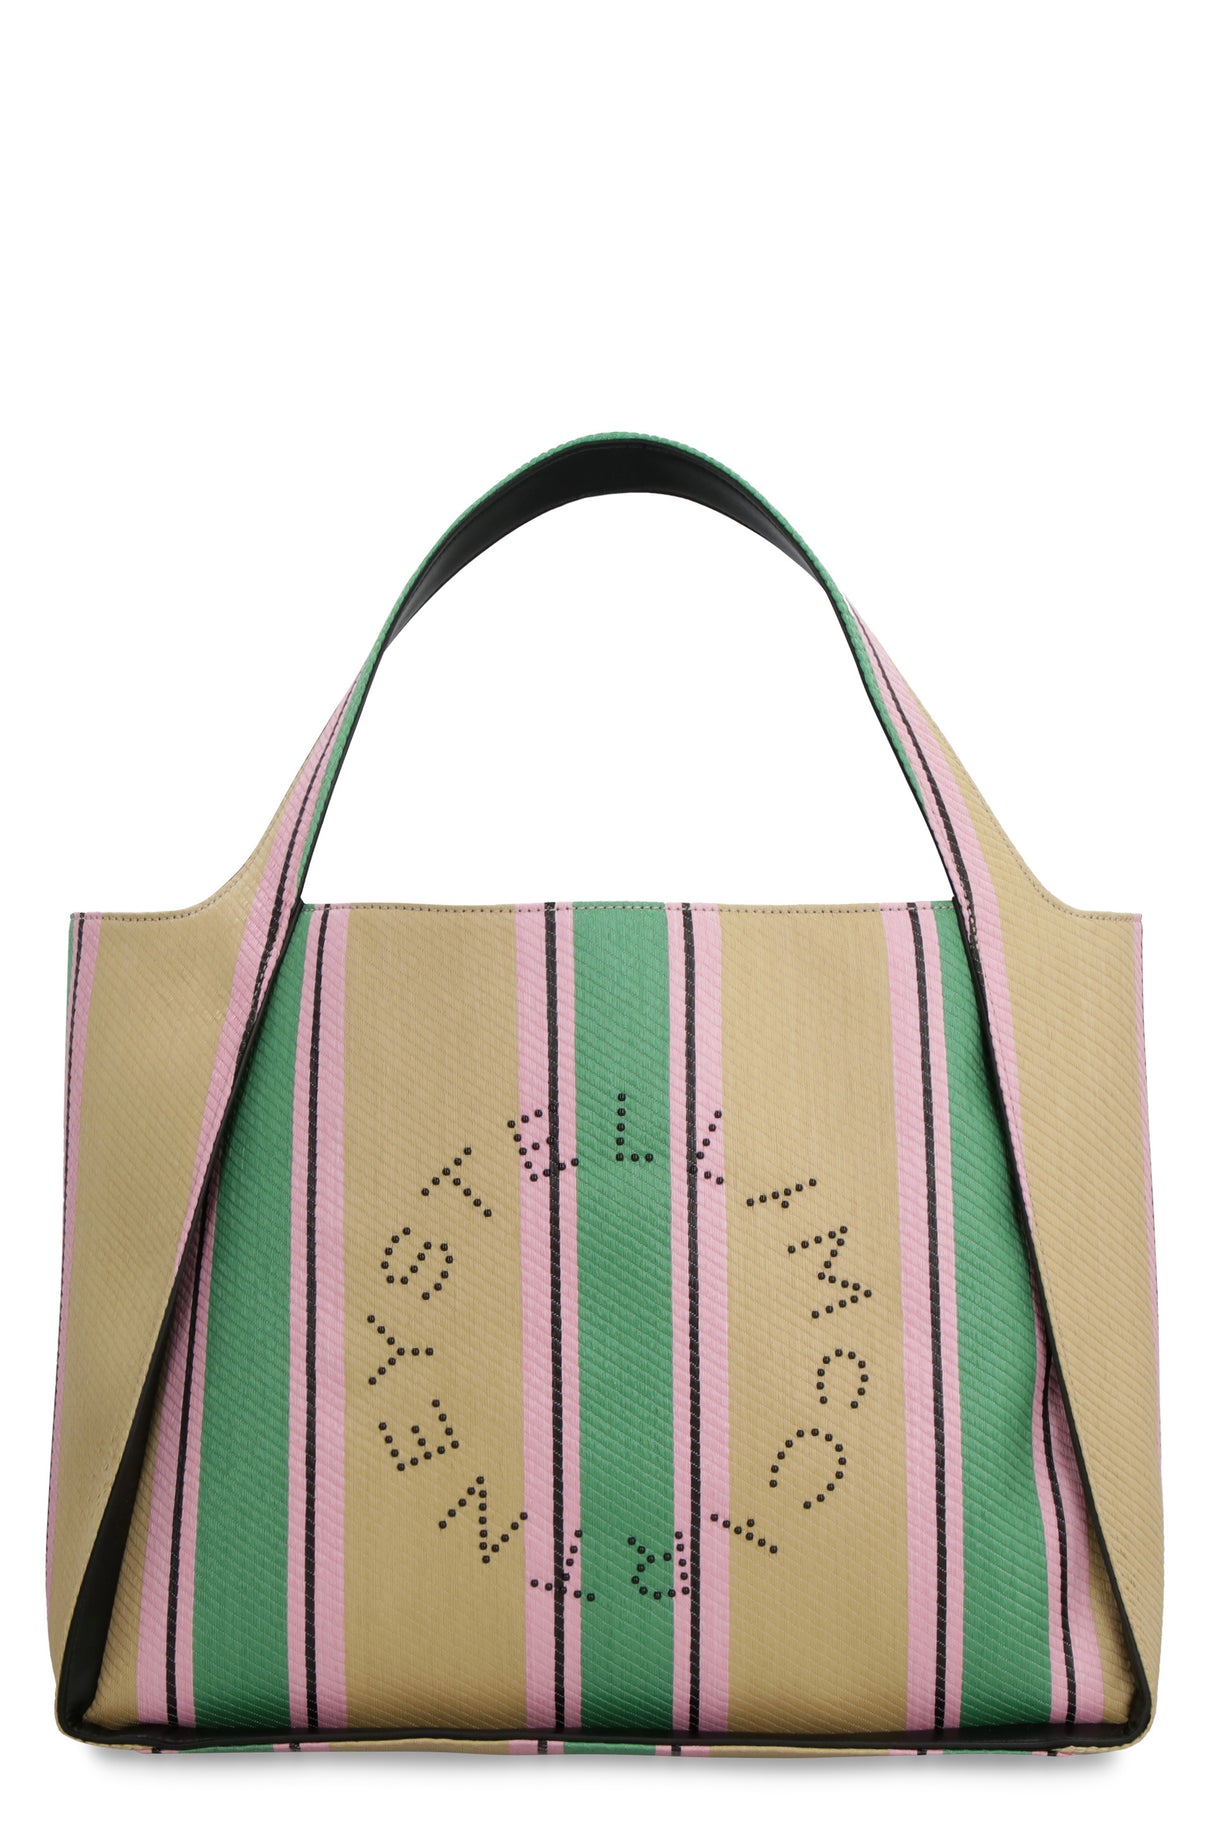 STELLA MCCARTNEY Multicolor Striped Tote Handbag for Women - Sustainable and Stylish